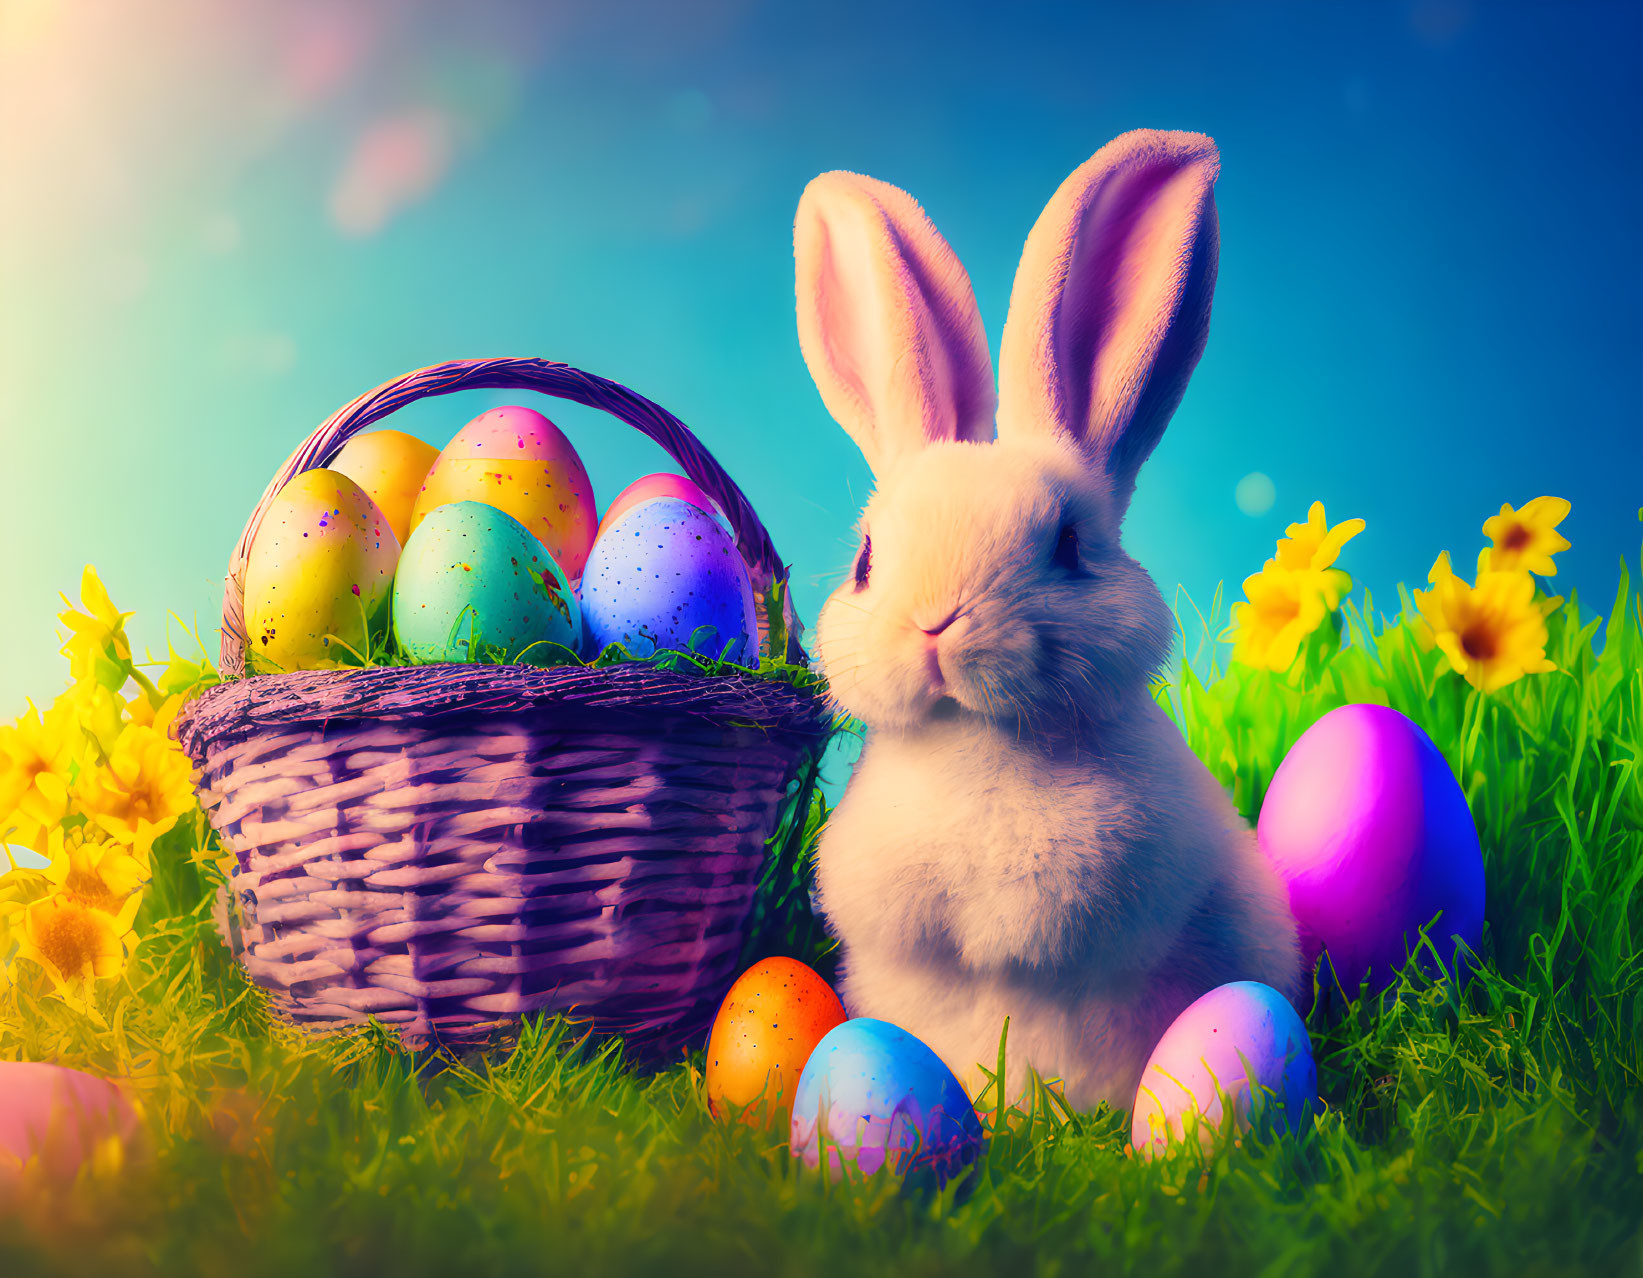 Fluffy rabbit with Easter eggs on grassy field